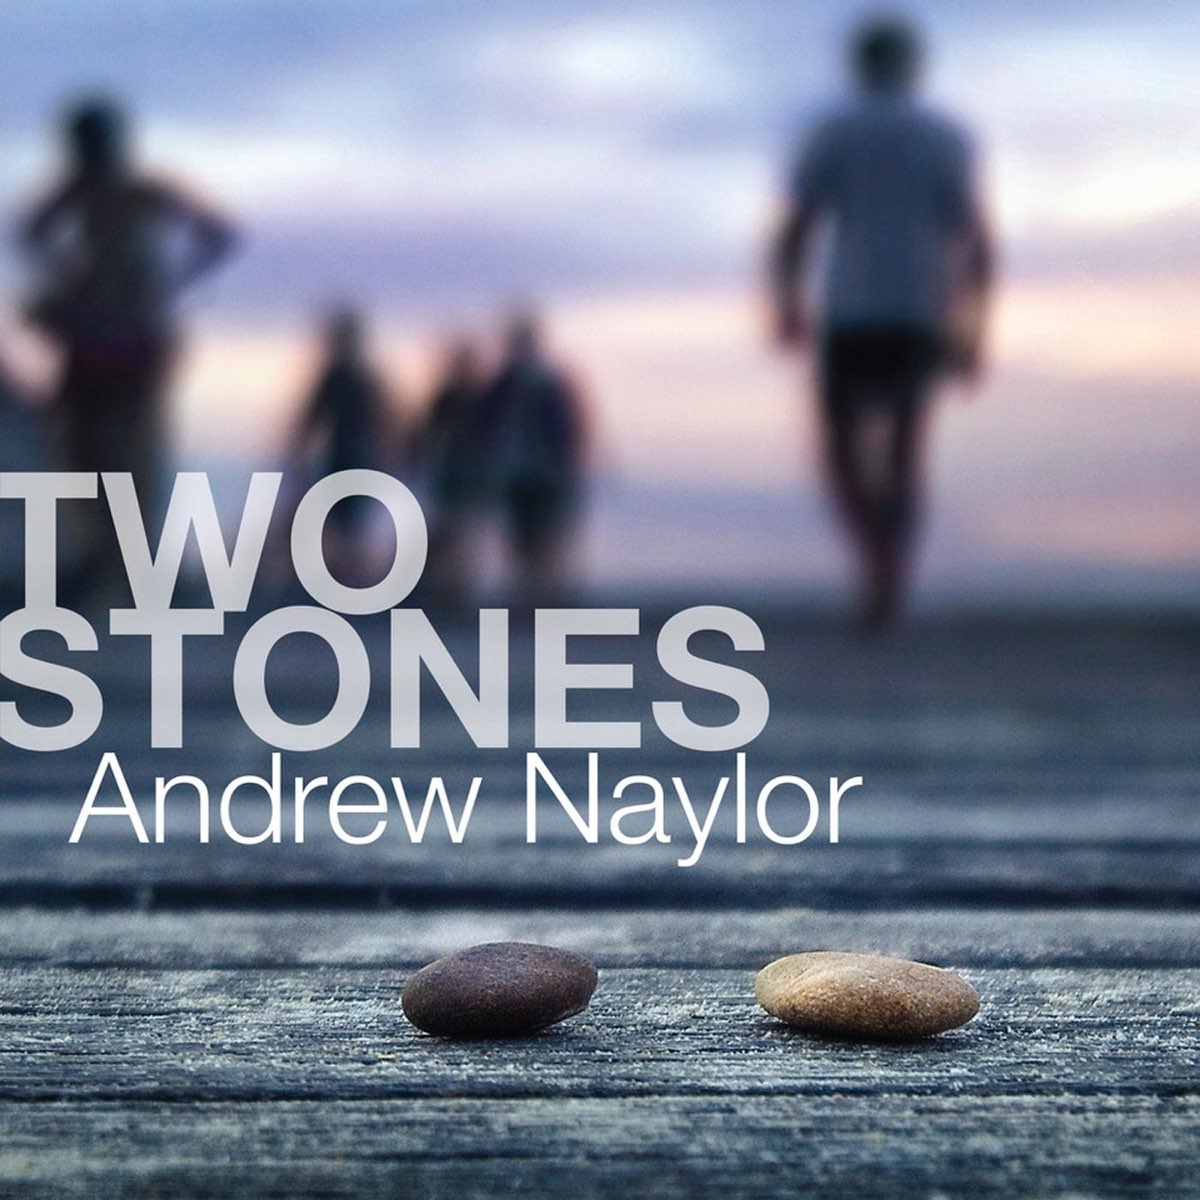 The two stones